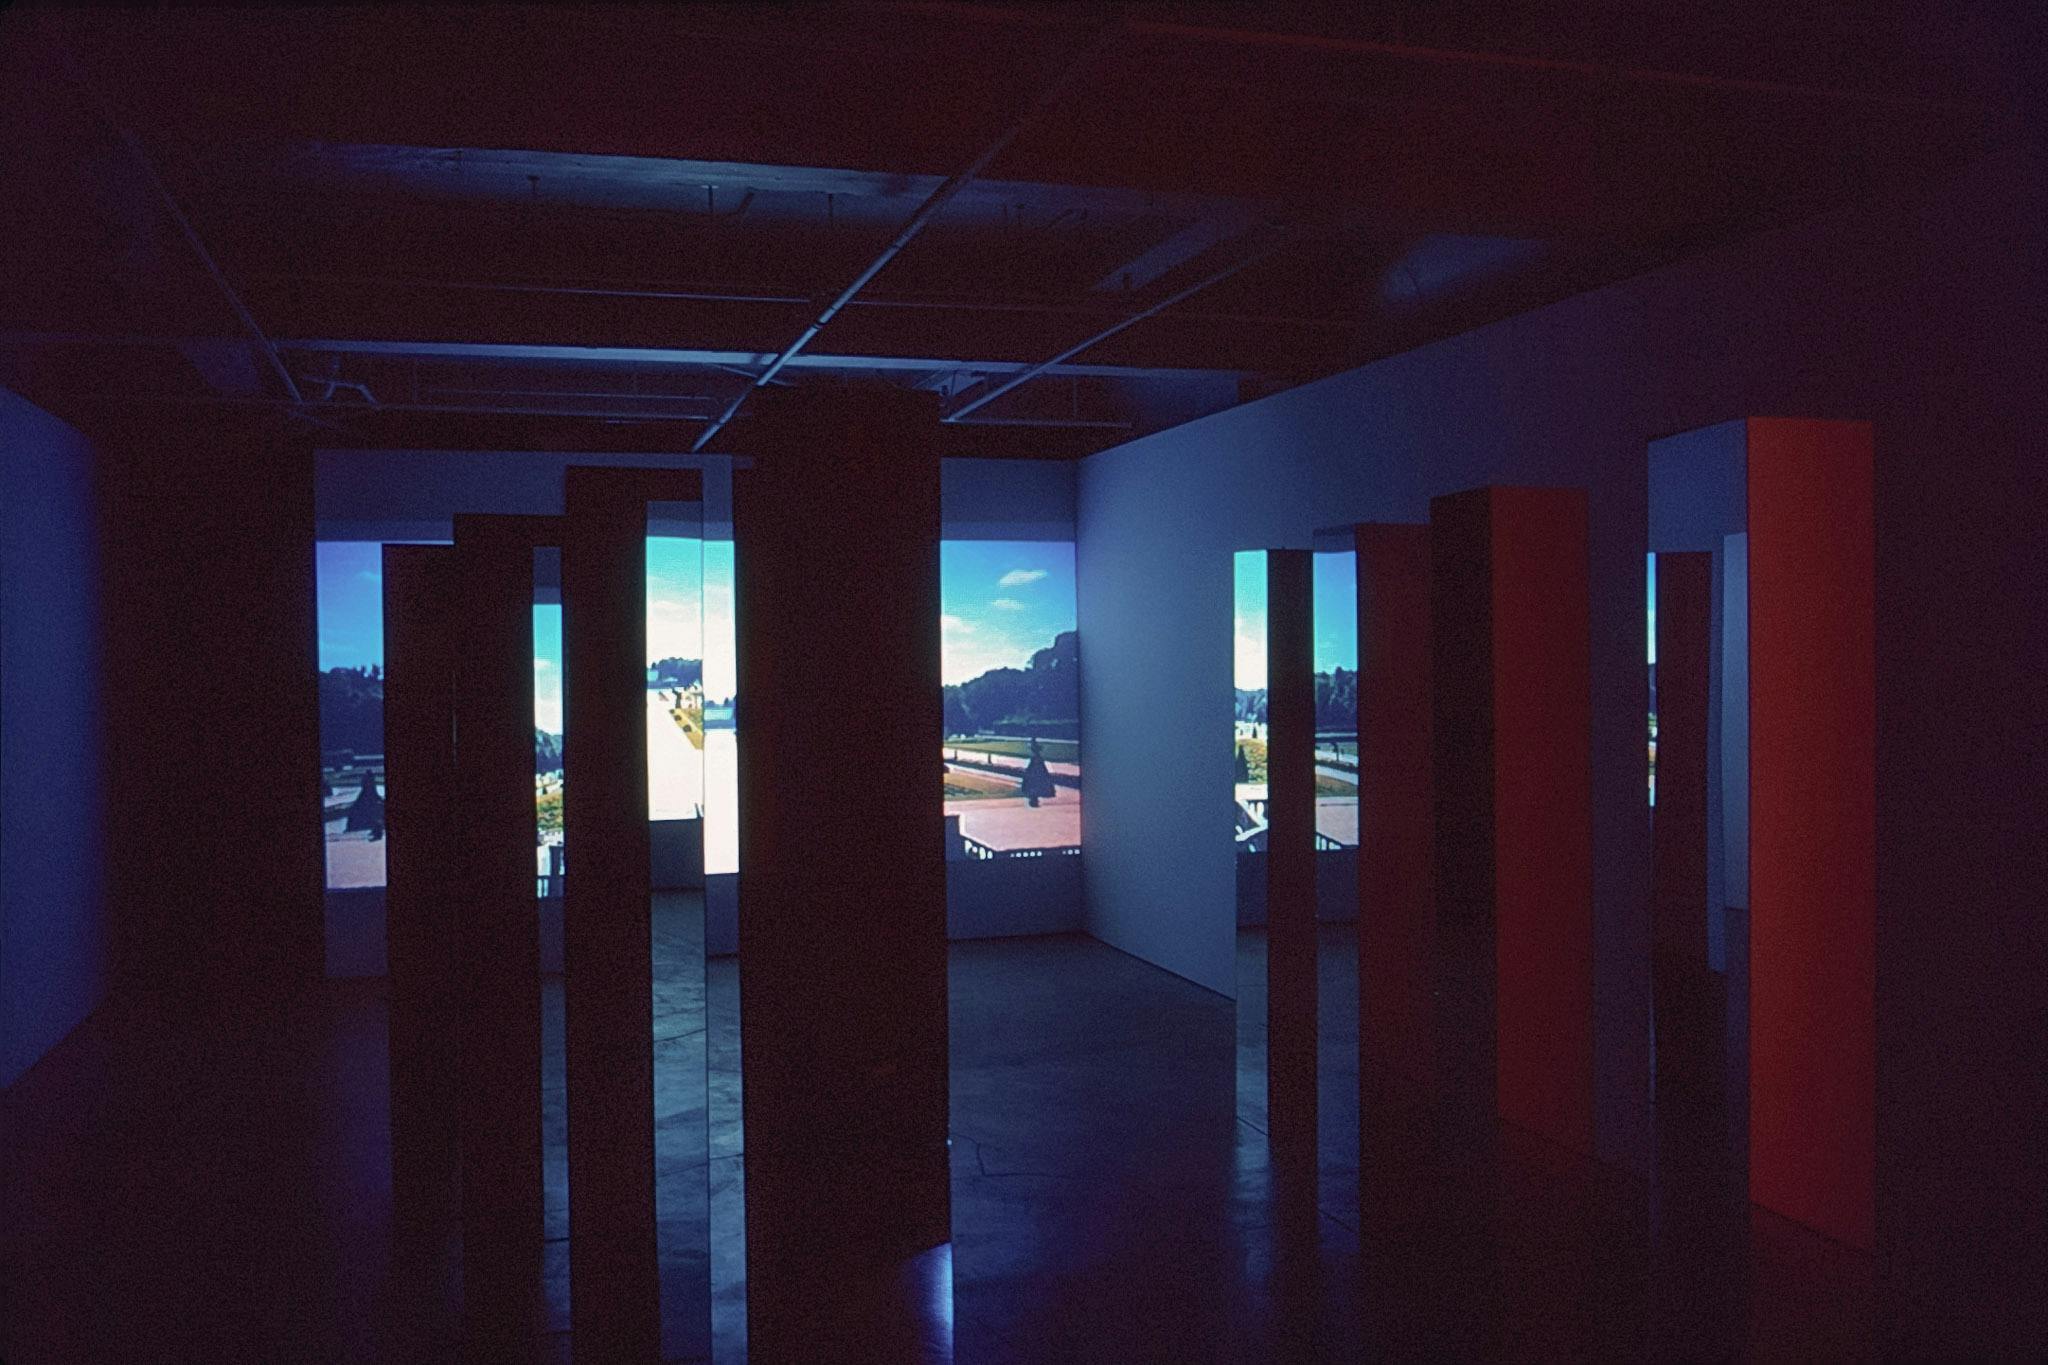 Eight large mirrored columns stand on the gallery floor. A photographed image of a garden is projected on the front wall. Reflections on the mirrors show a red light illuminating the back wall.